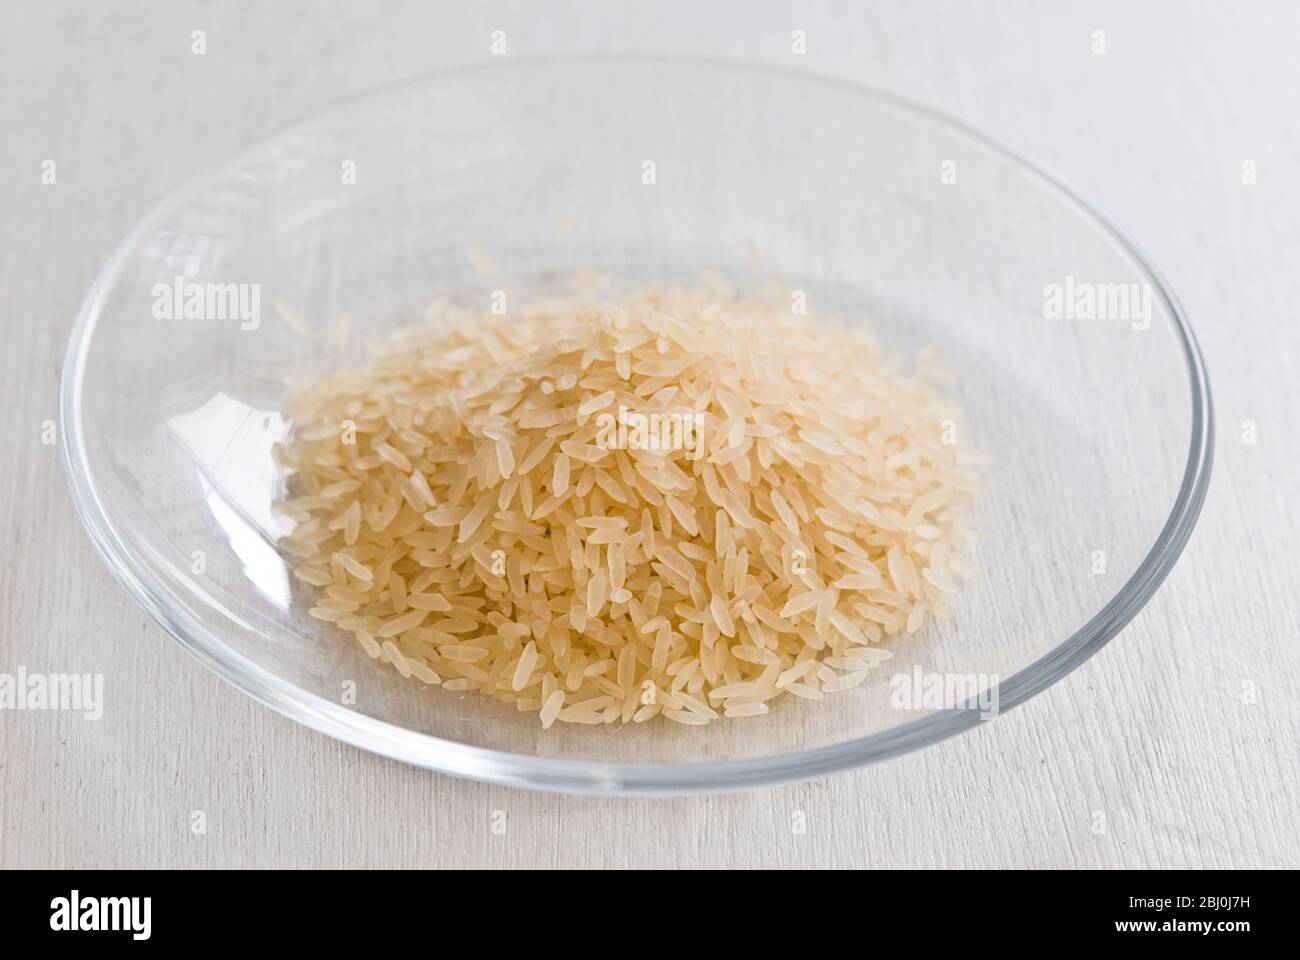 Small pile of natural longgrain rice on white background - Stock Photo